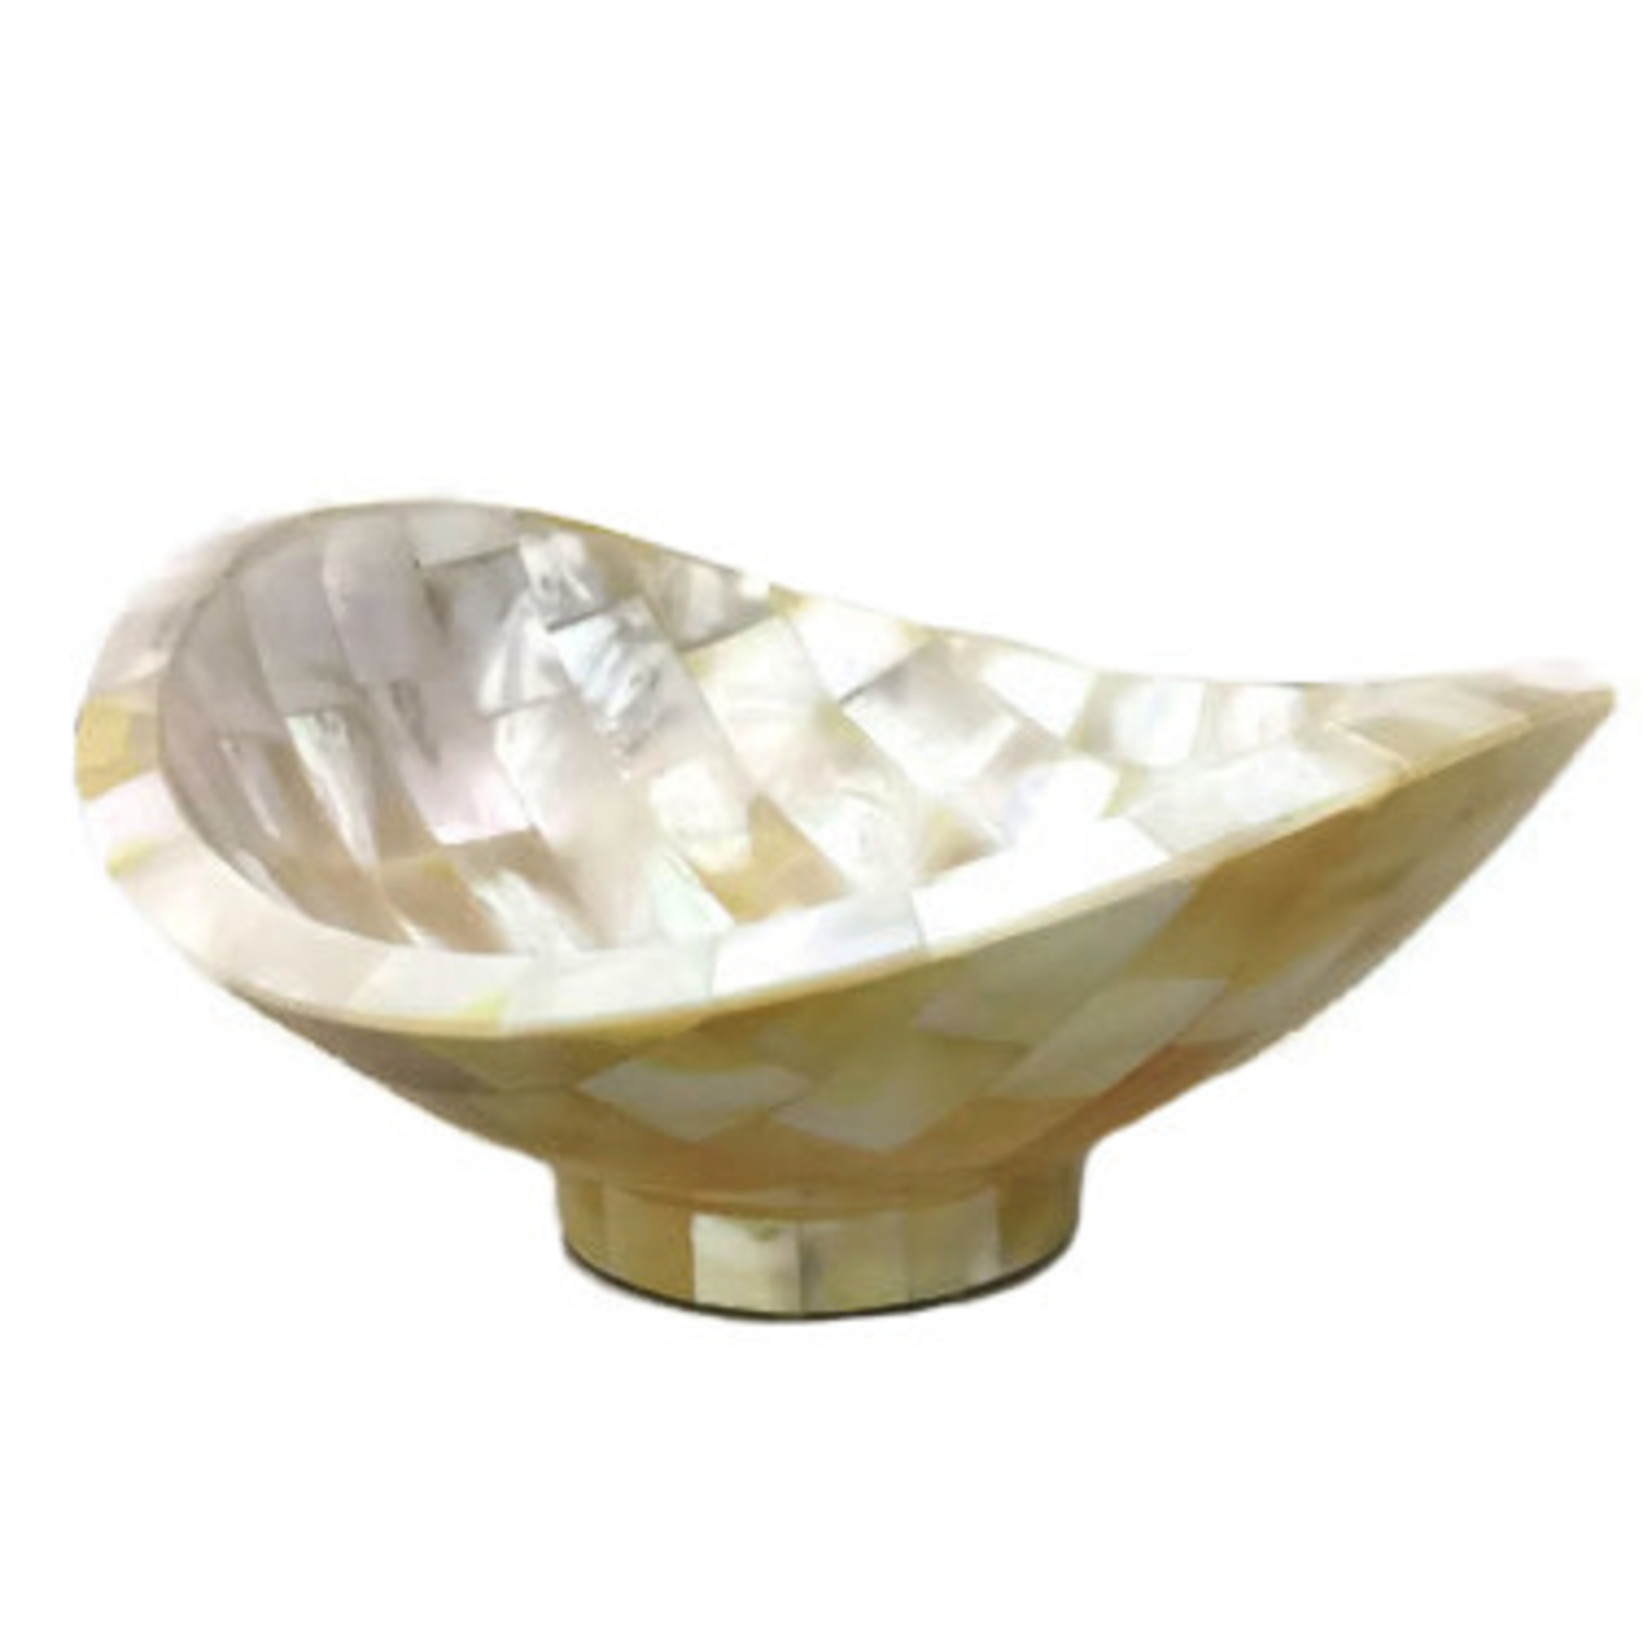 Handmade Mother of Pearl Mosaic Oval Bowl with Round Base Large